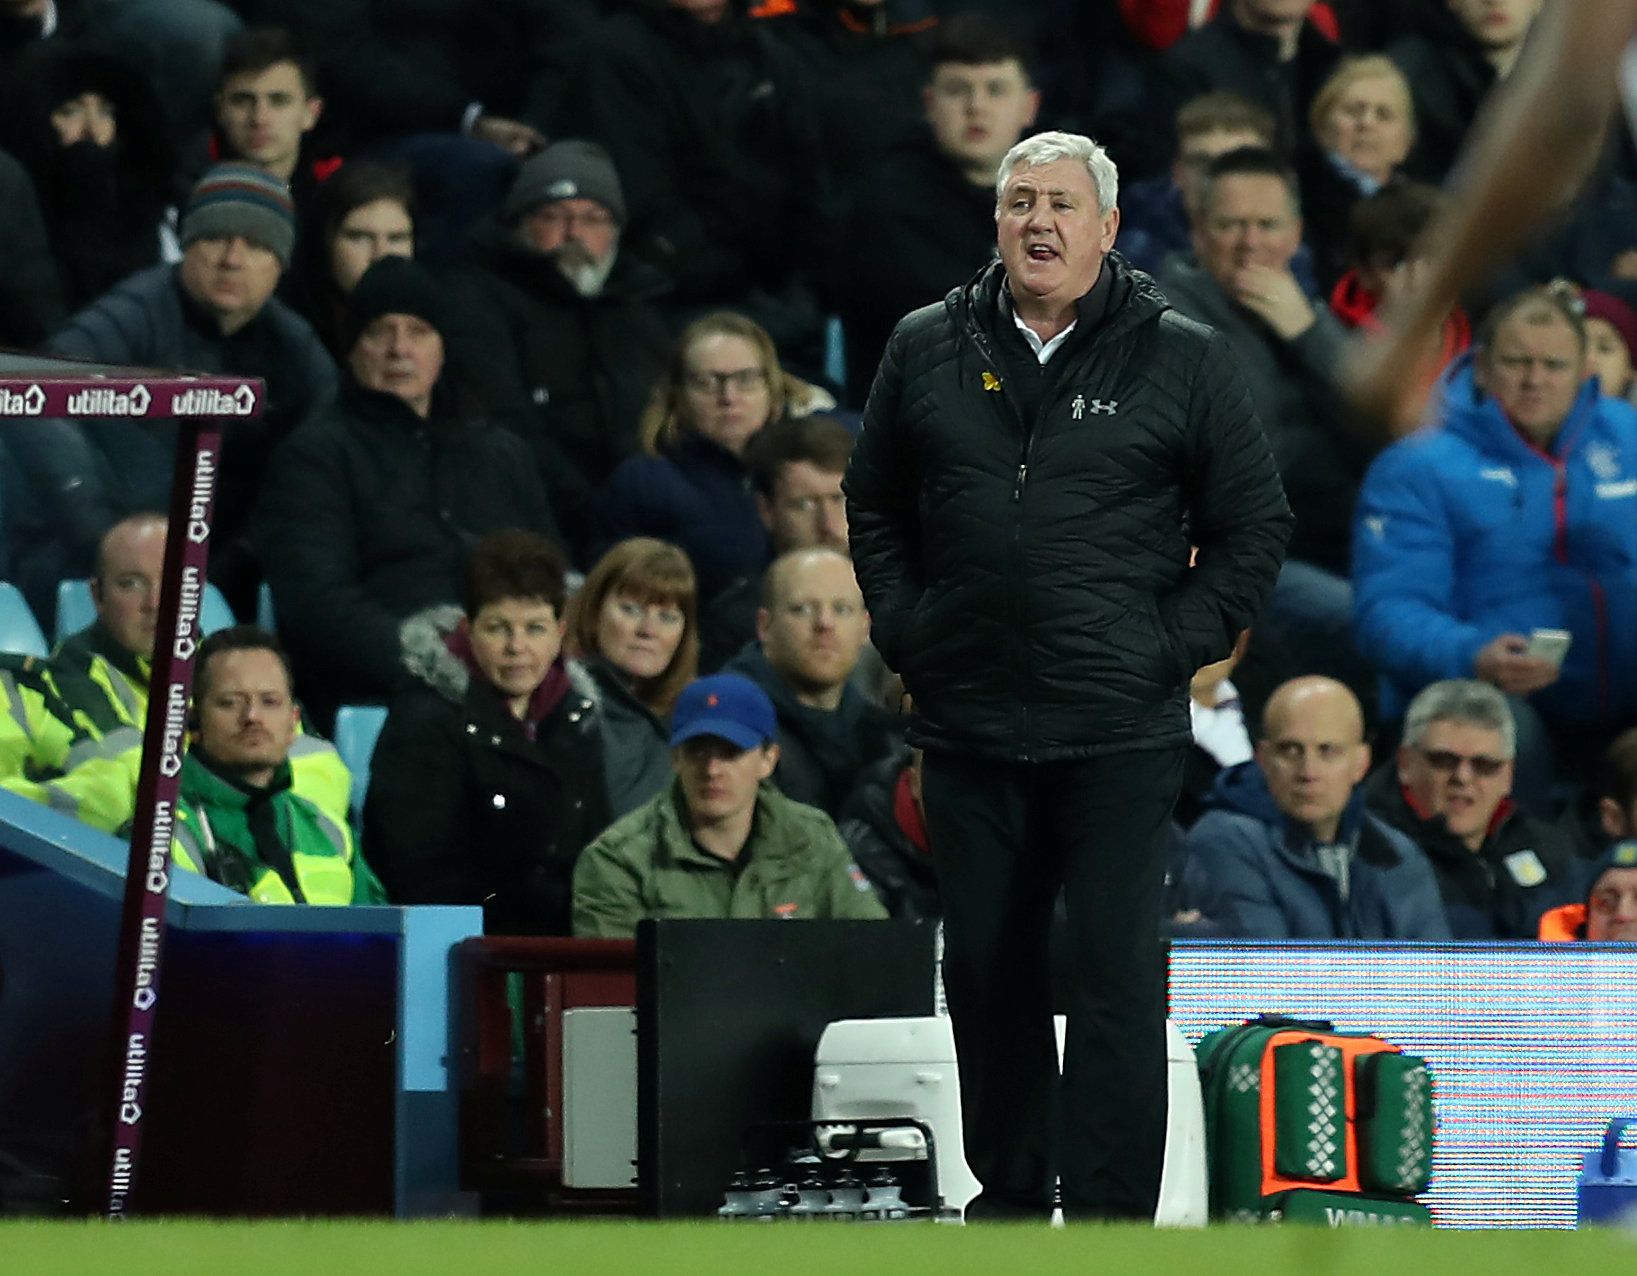 Soccer Football - Championship - Aston Villa vs Queens Park Rangers - Villa Park, Birmingham, Britain - March 13, 2018   Aston Villa manager Steve Bruce    Action Images/John Clifton    EDITORIAL USE ONLY. No use with unauthorized audio, video, data, fixture lists, club/league logos or 